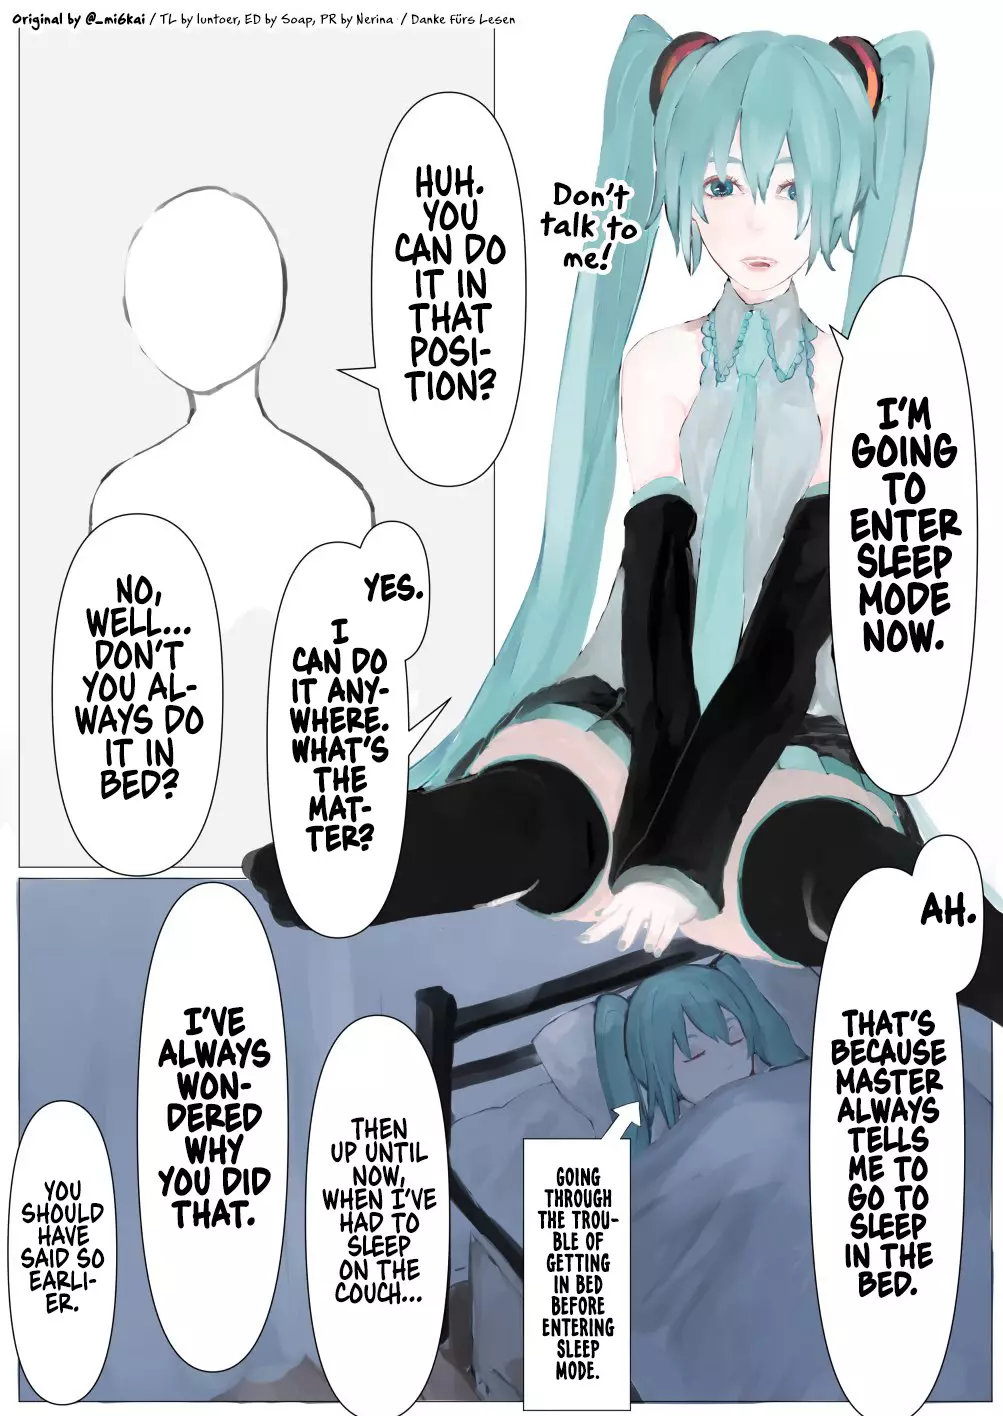 The Daily Life Of Master & Hatsune Miku - 41 page 1-1c4ef74c